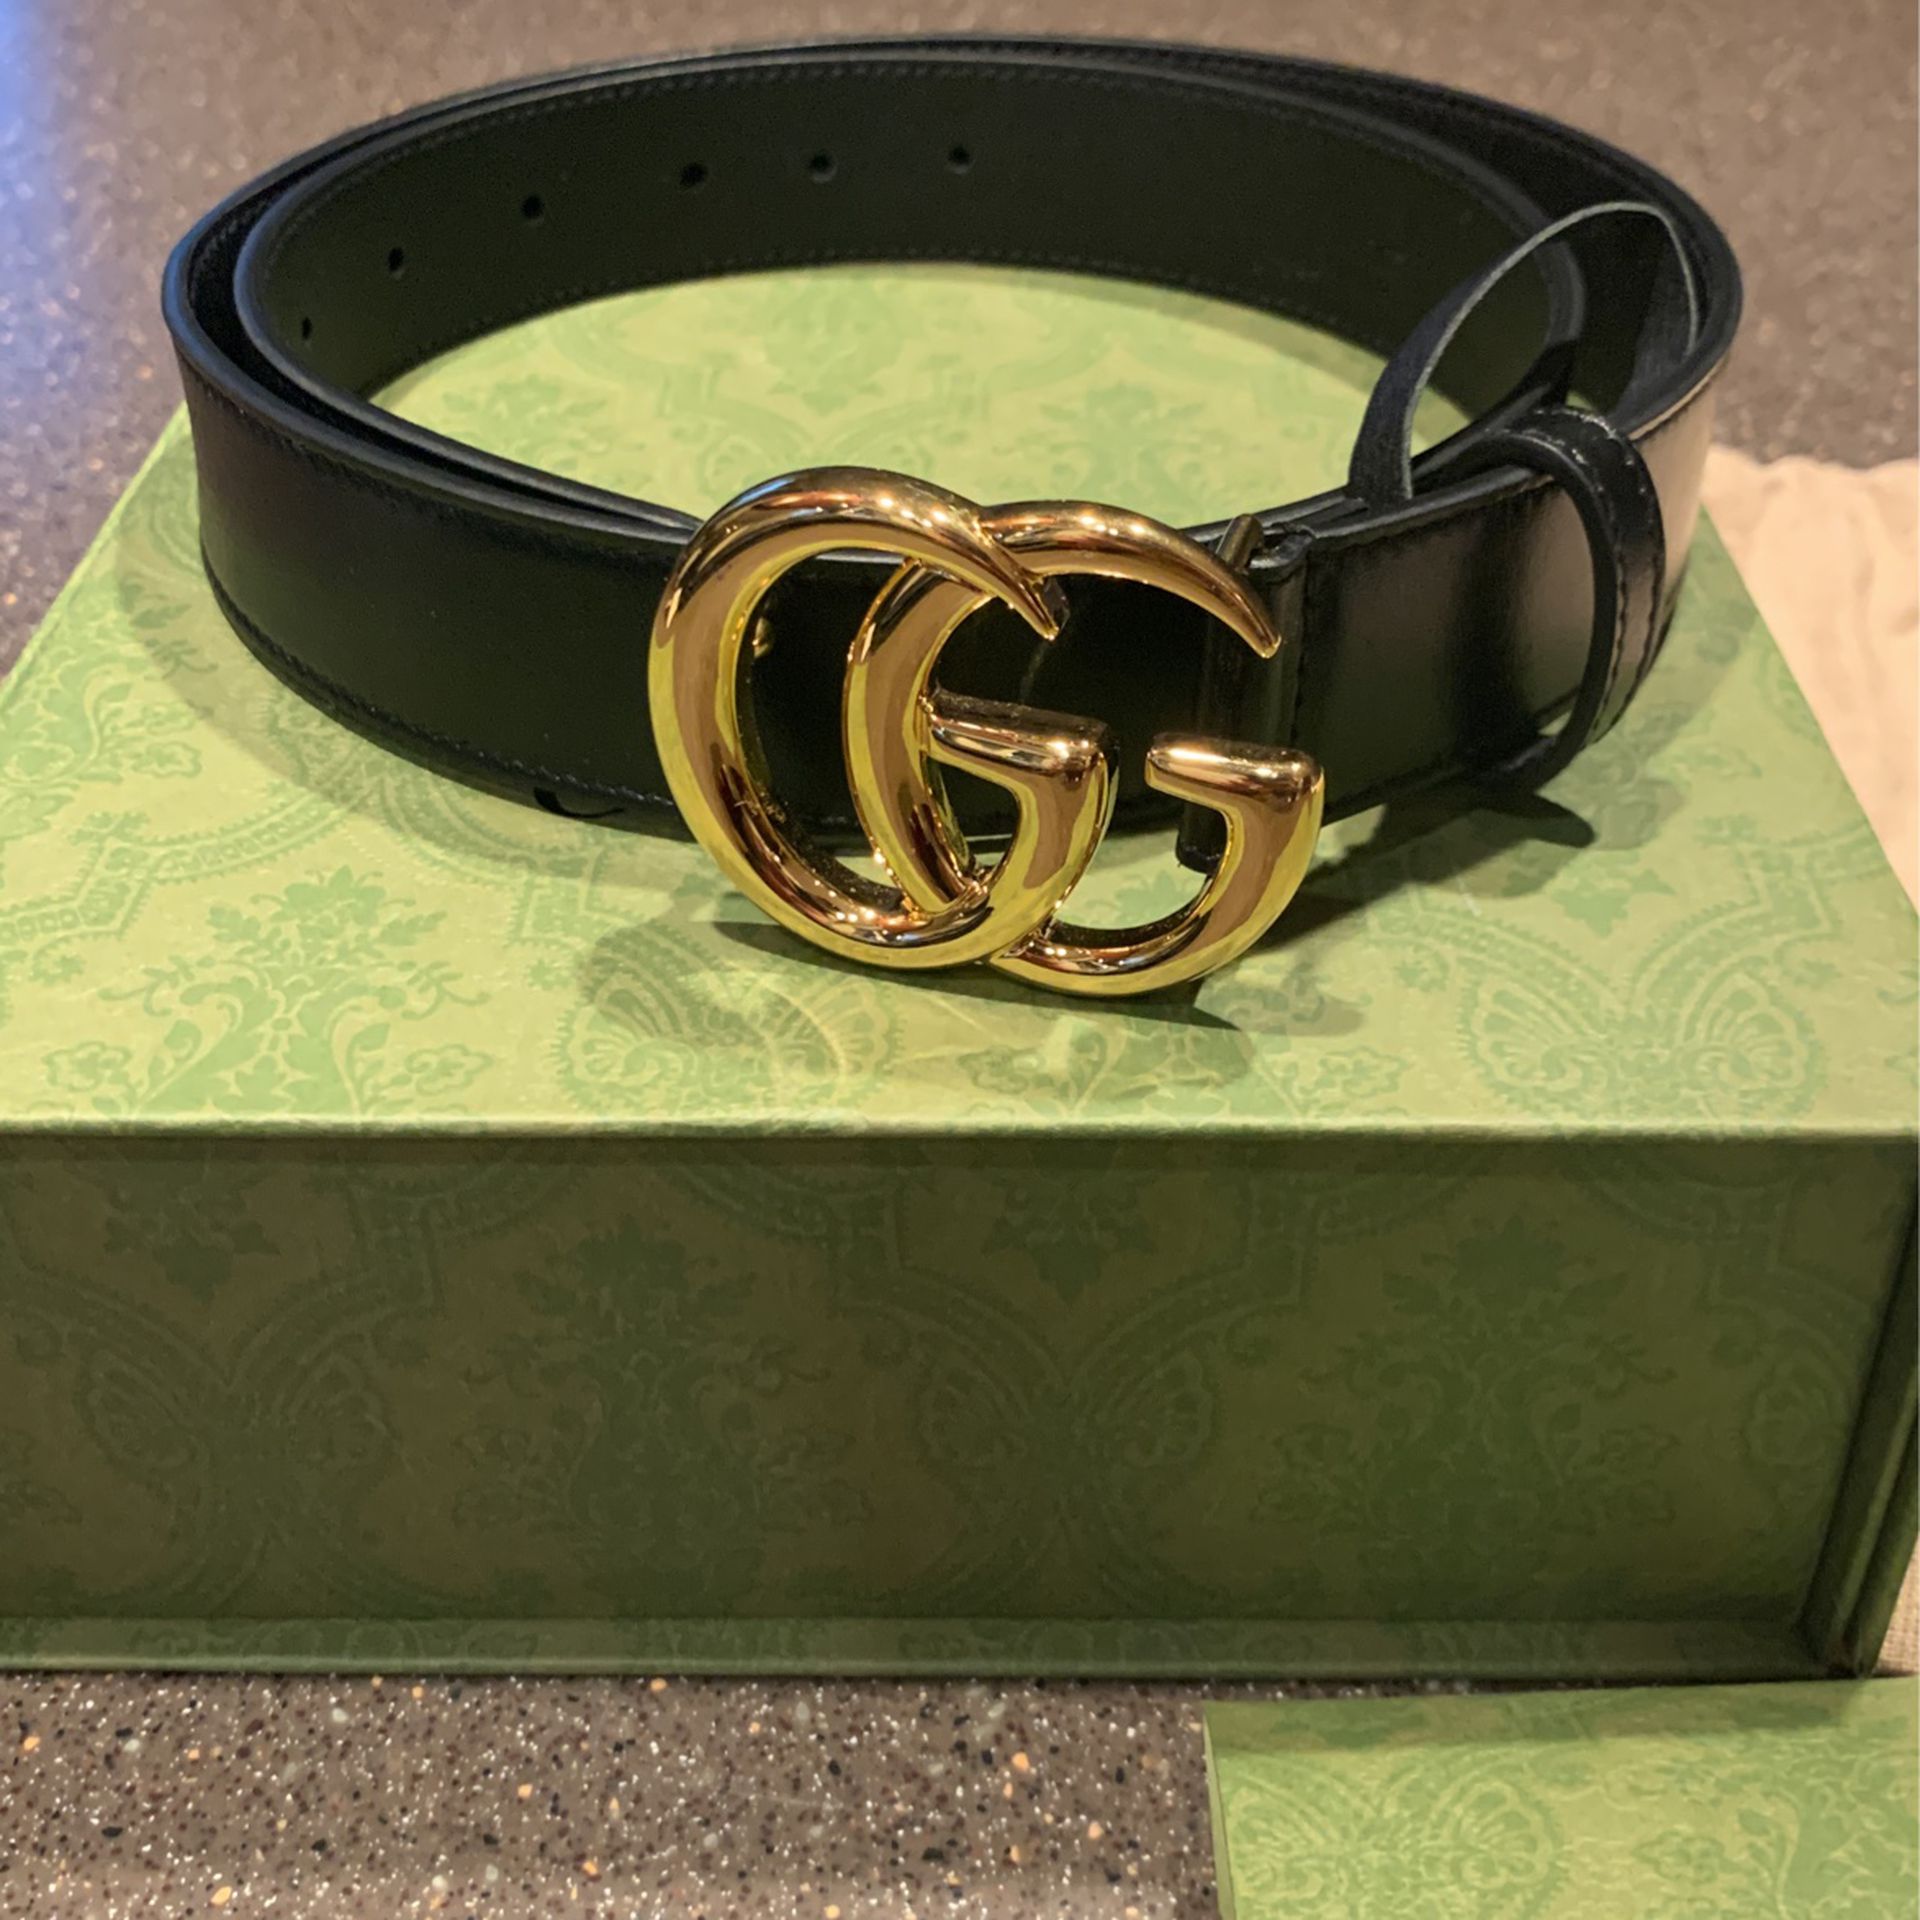 Gucci GG Marmont Belt with Shiny Buckle - Size 90